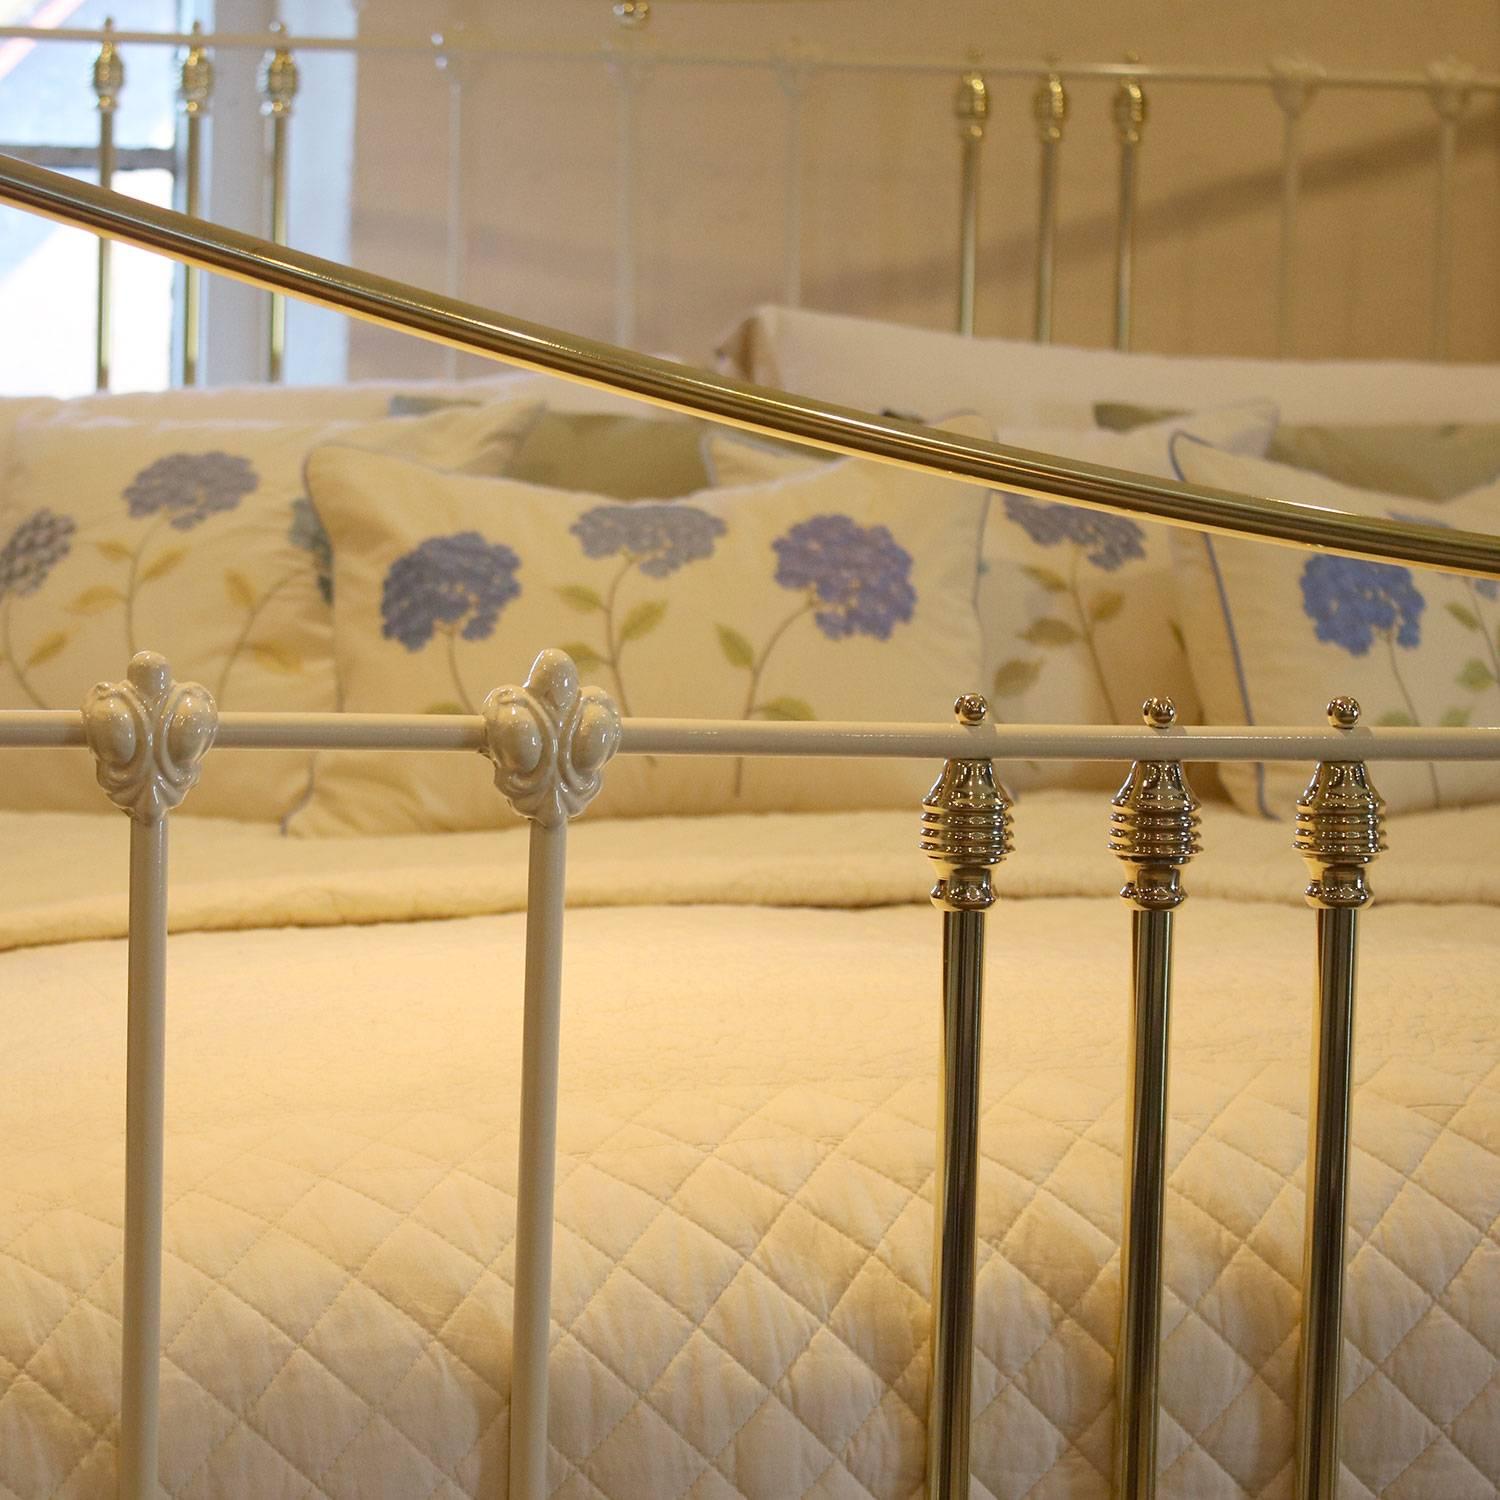 British Wide Cast Iron and Brass Bed in Cream, MSK43